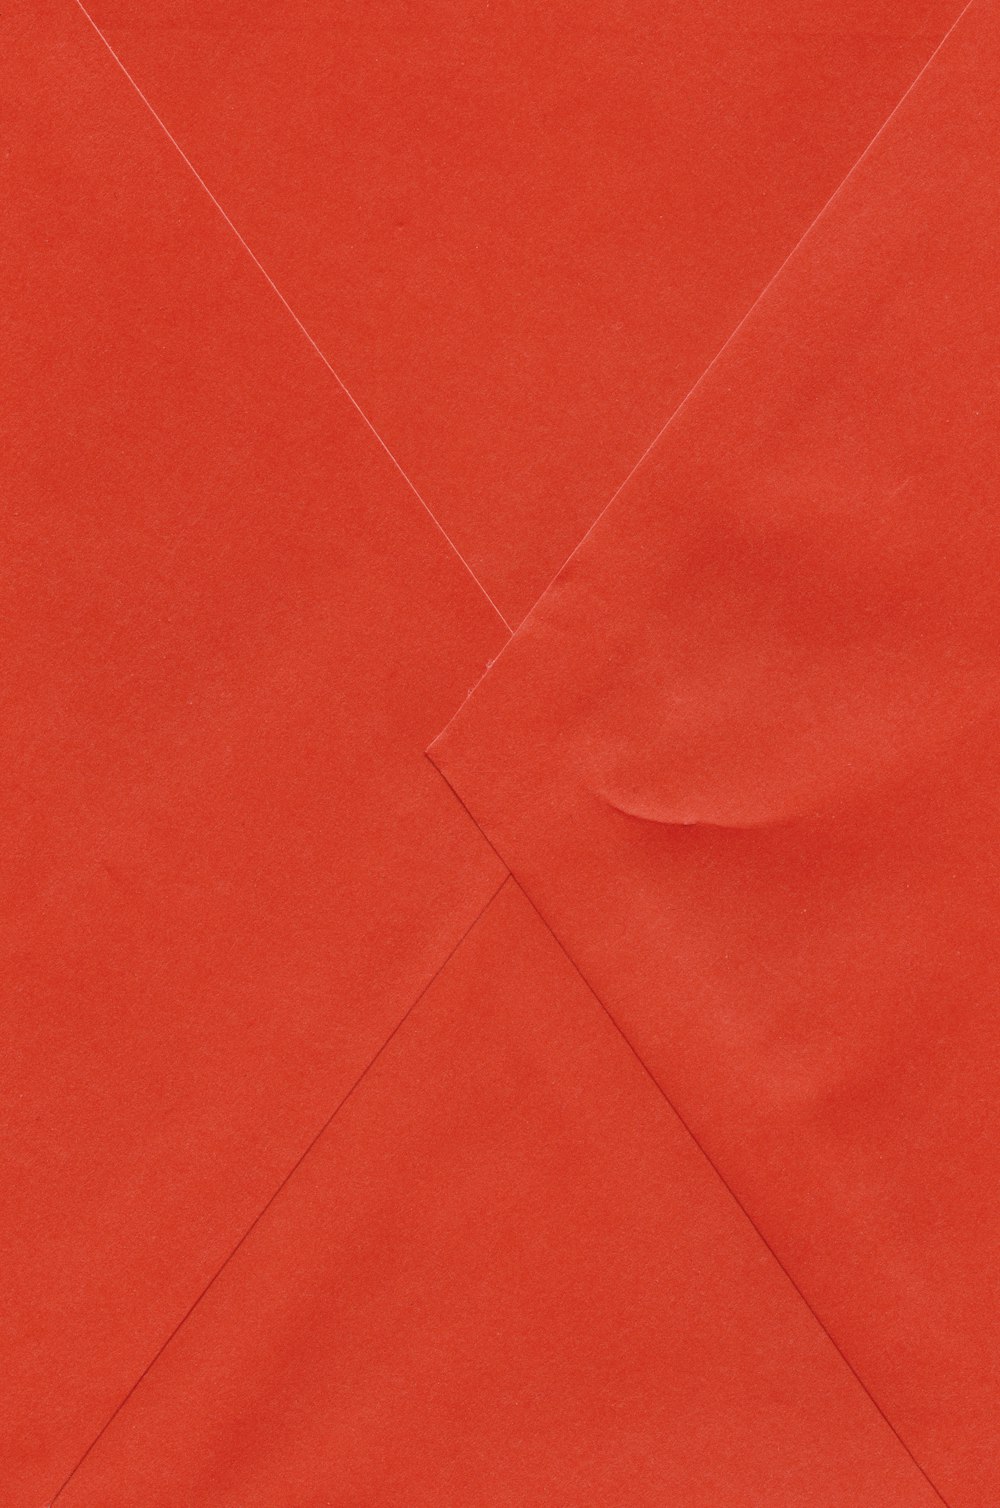 a piece of red paper folded in half